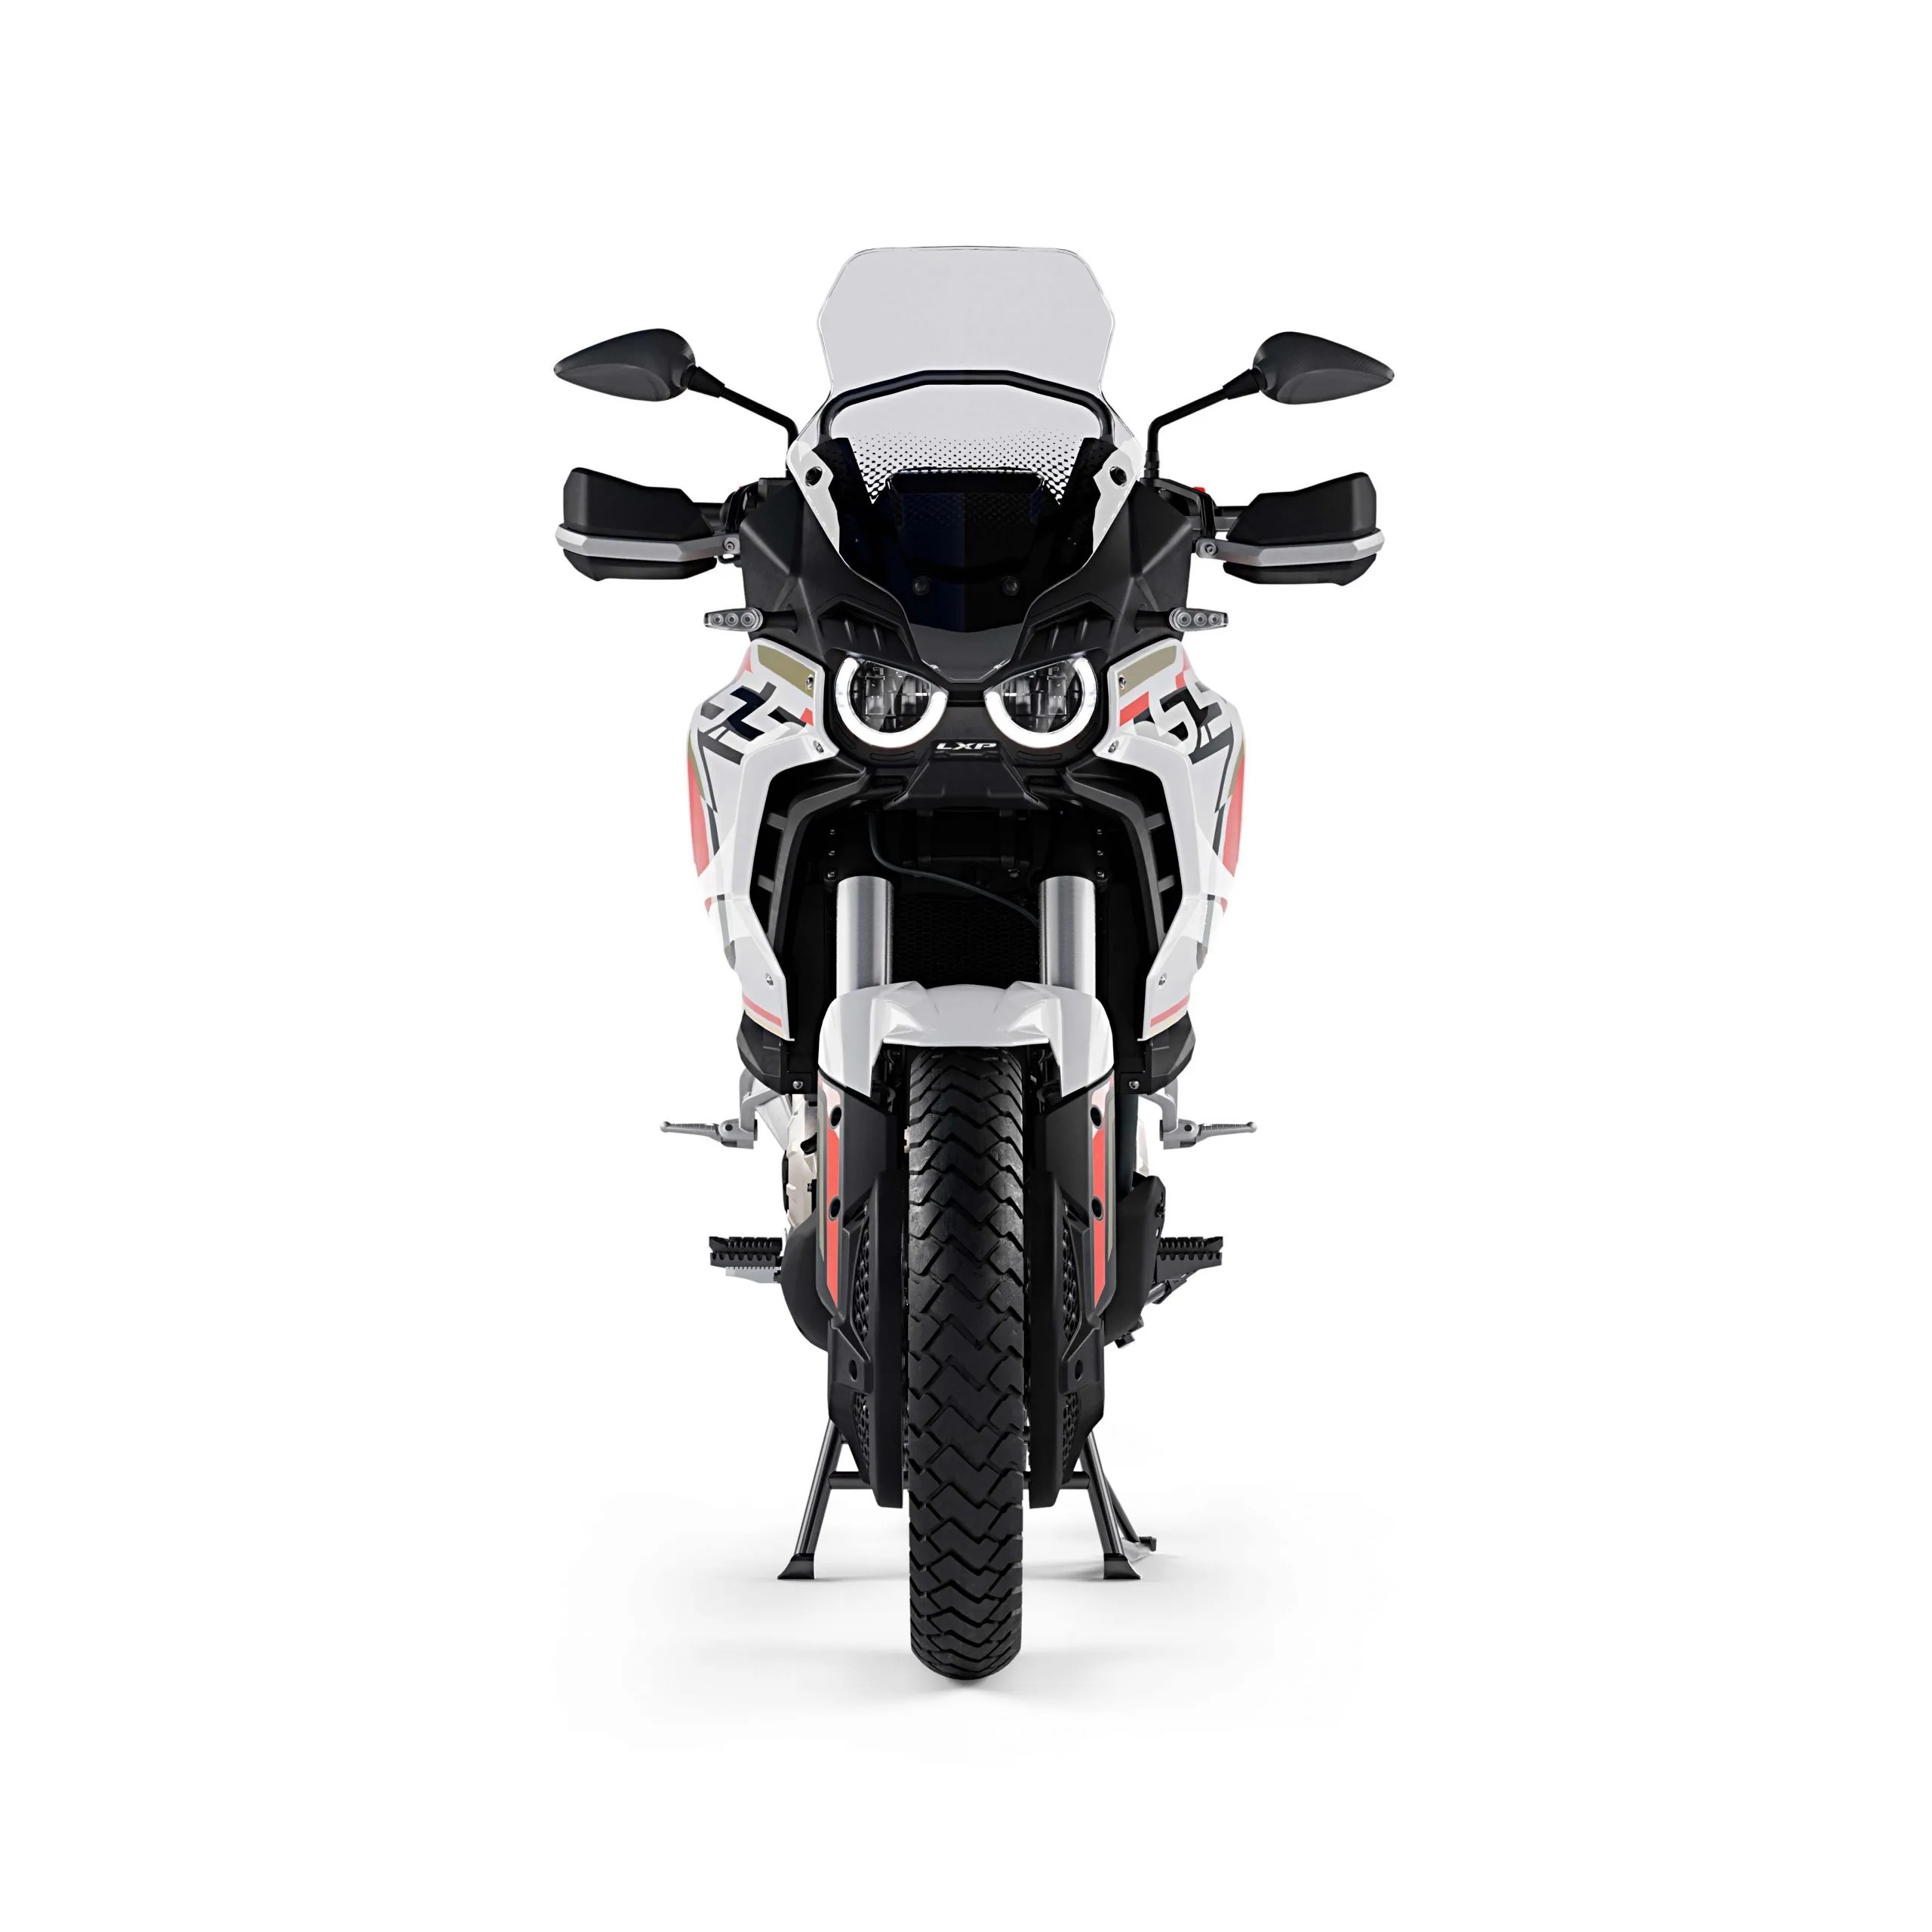 Lucky Explorer Project adventurer-touring motorcycle from MV Agusta